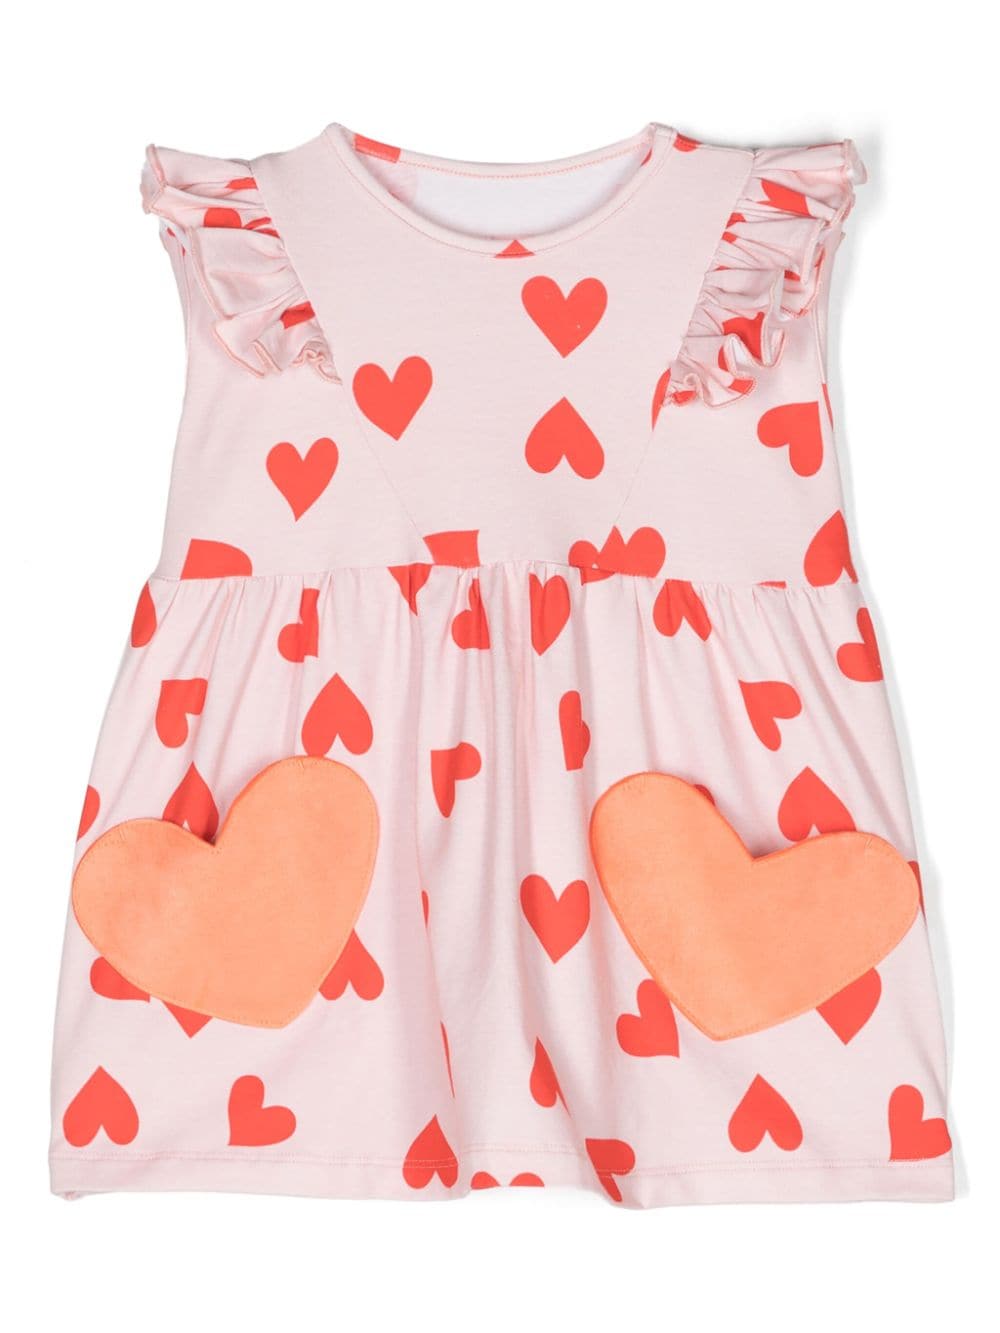 WAUW CAPOW by BANGBANG Clementine Lovely jersey dress - Pink von WAUW CAPOW by BANGBANG